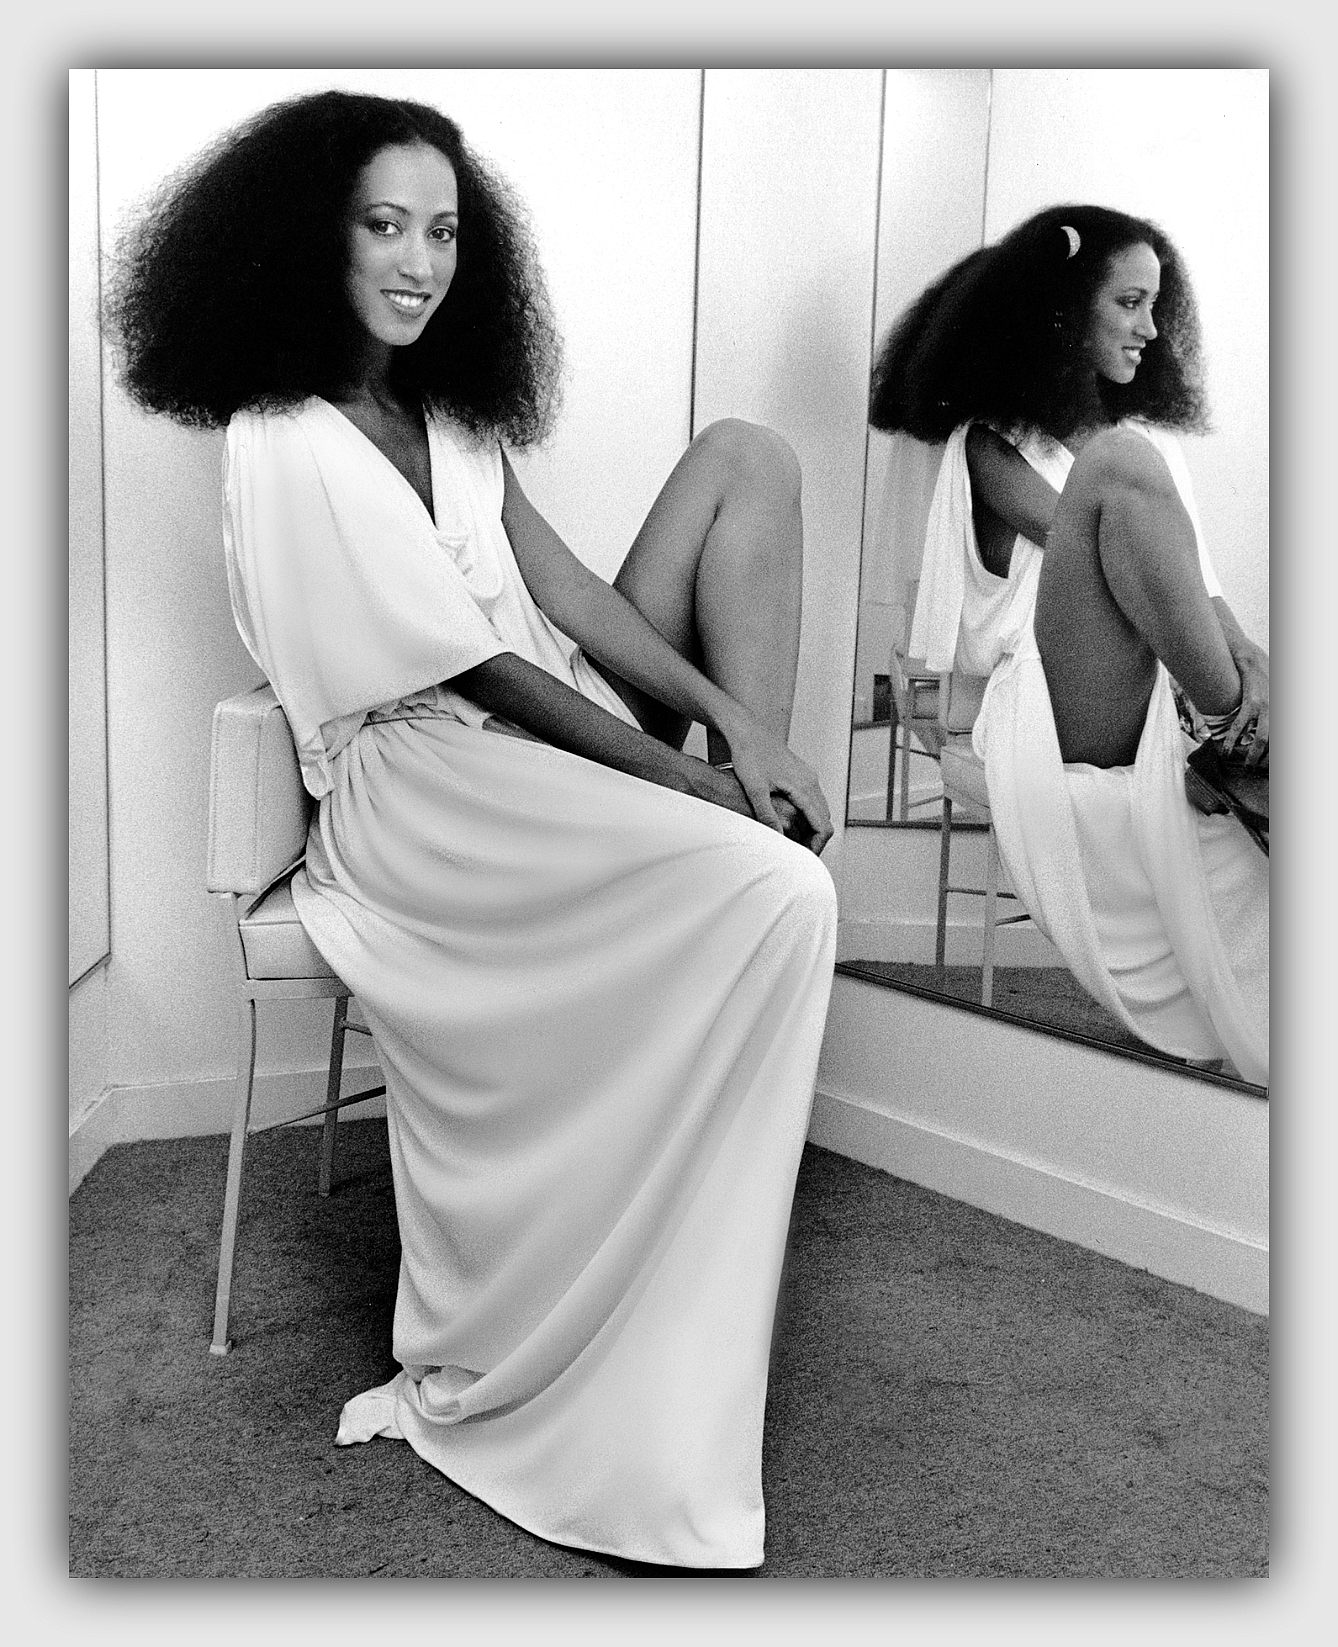 Pat Cleveland 1977 Photo by Ron Galella